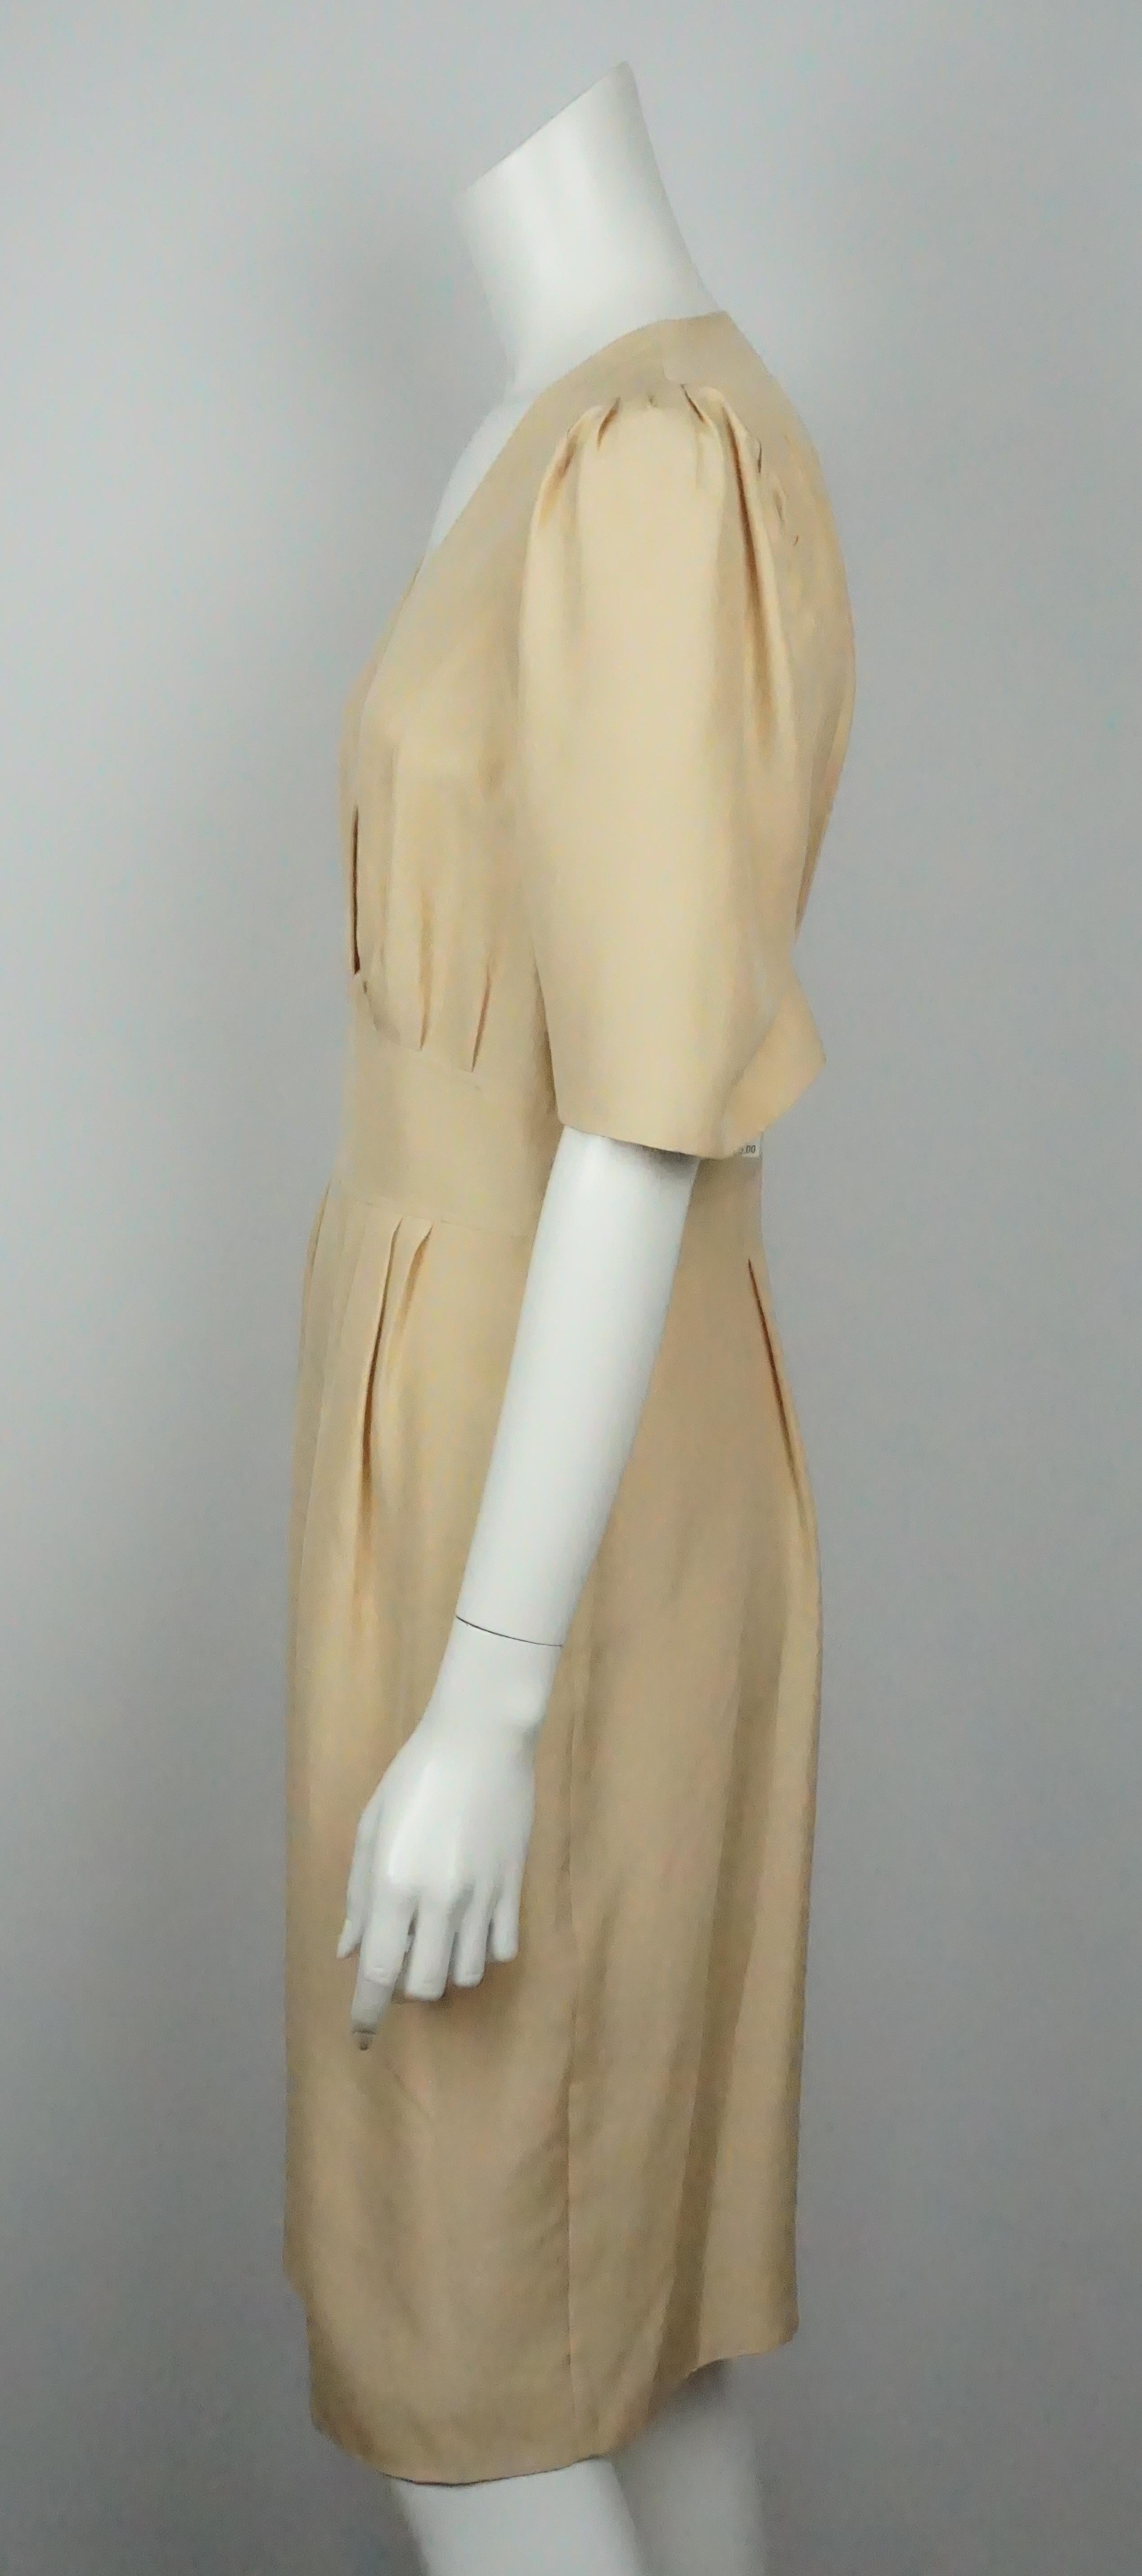 Chloe Beige Silk Dress - 38  This gorgeous classic silk dress is in excellent condition. The dress is lined in silk and has a left side zipper. There are over sized sleeves that hit right around the elbow. The neckline forms into a v neck and there